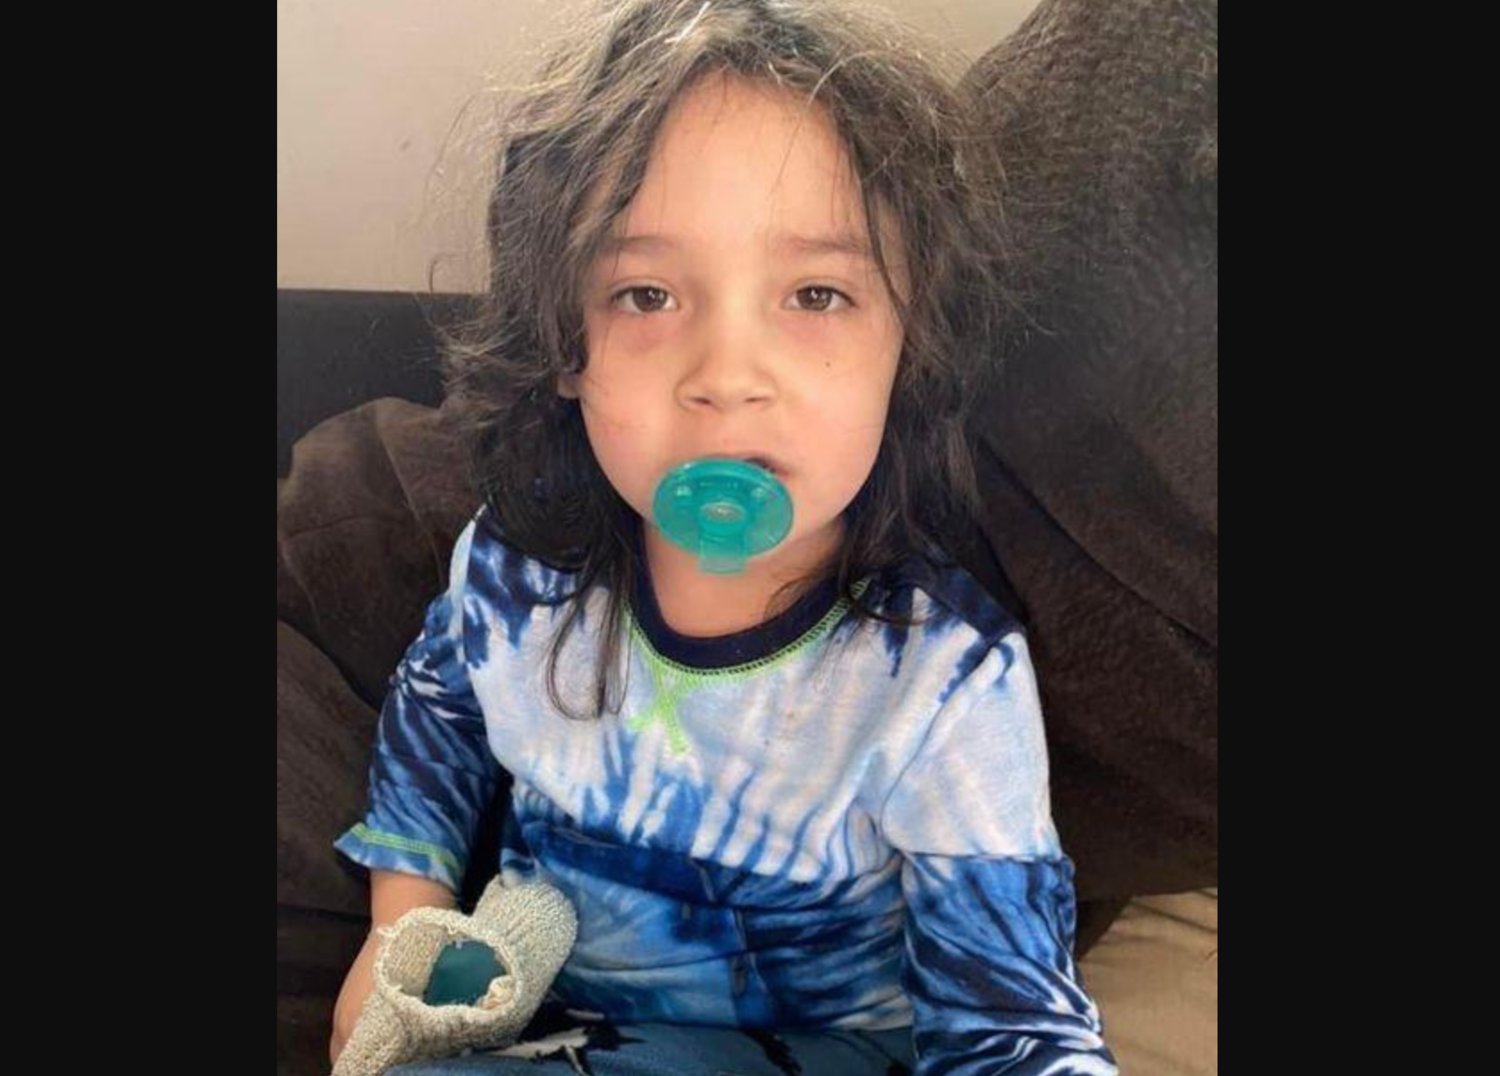 The bill is a recommendation from the Washington State Missing and Murdered Indigenous Women and People Task Force and the Office of the Attorney General. It is named after Lucian Munguia, who was 4 years old when he was reported missing Sept. 10 from Sarg Hubbard Park in Yakima.